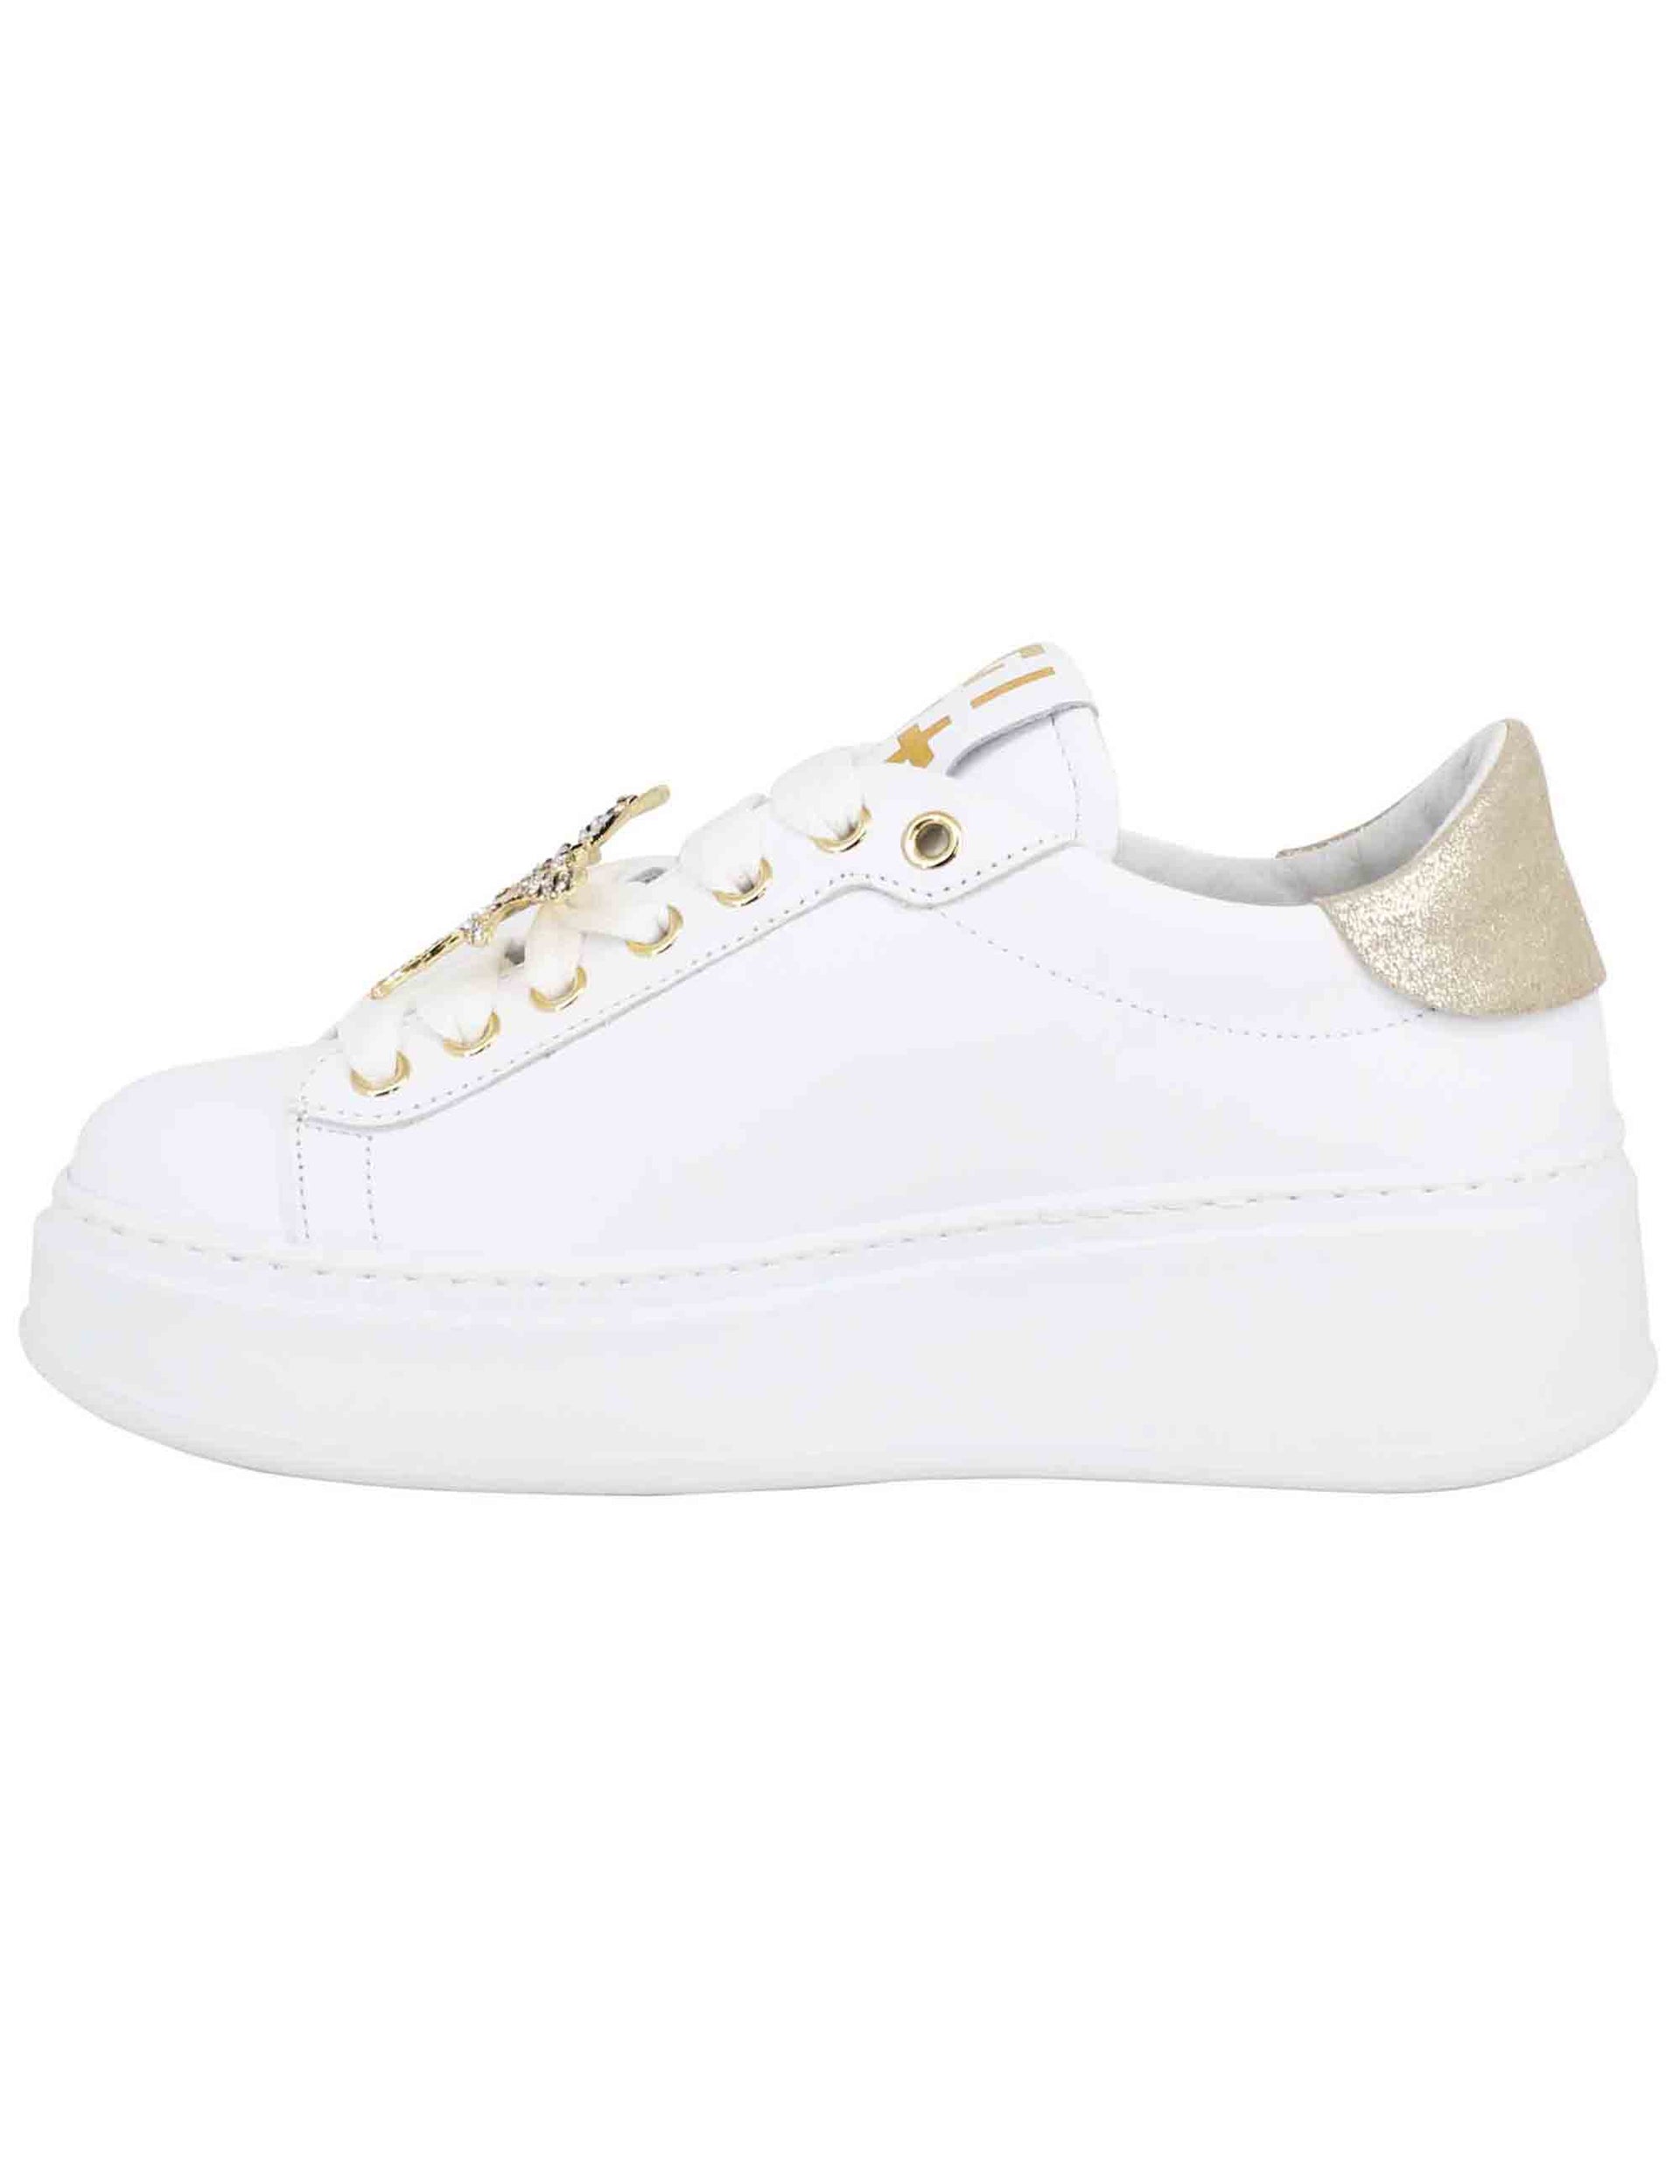 Women's white leather sneakers with jewel charms and high sole